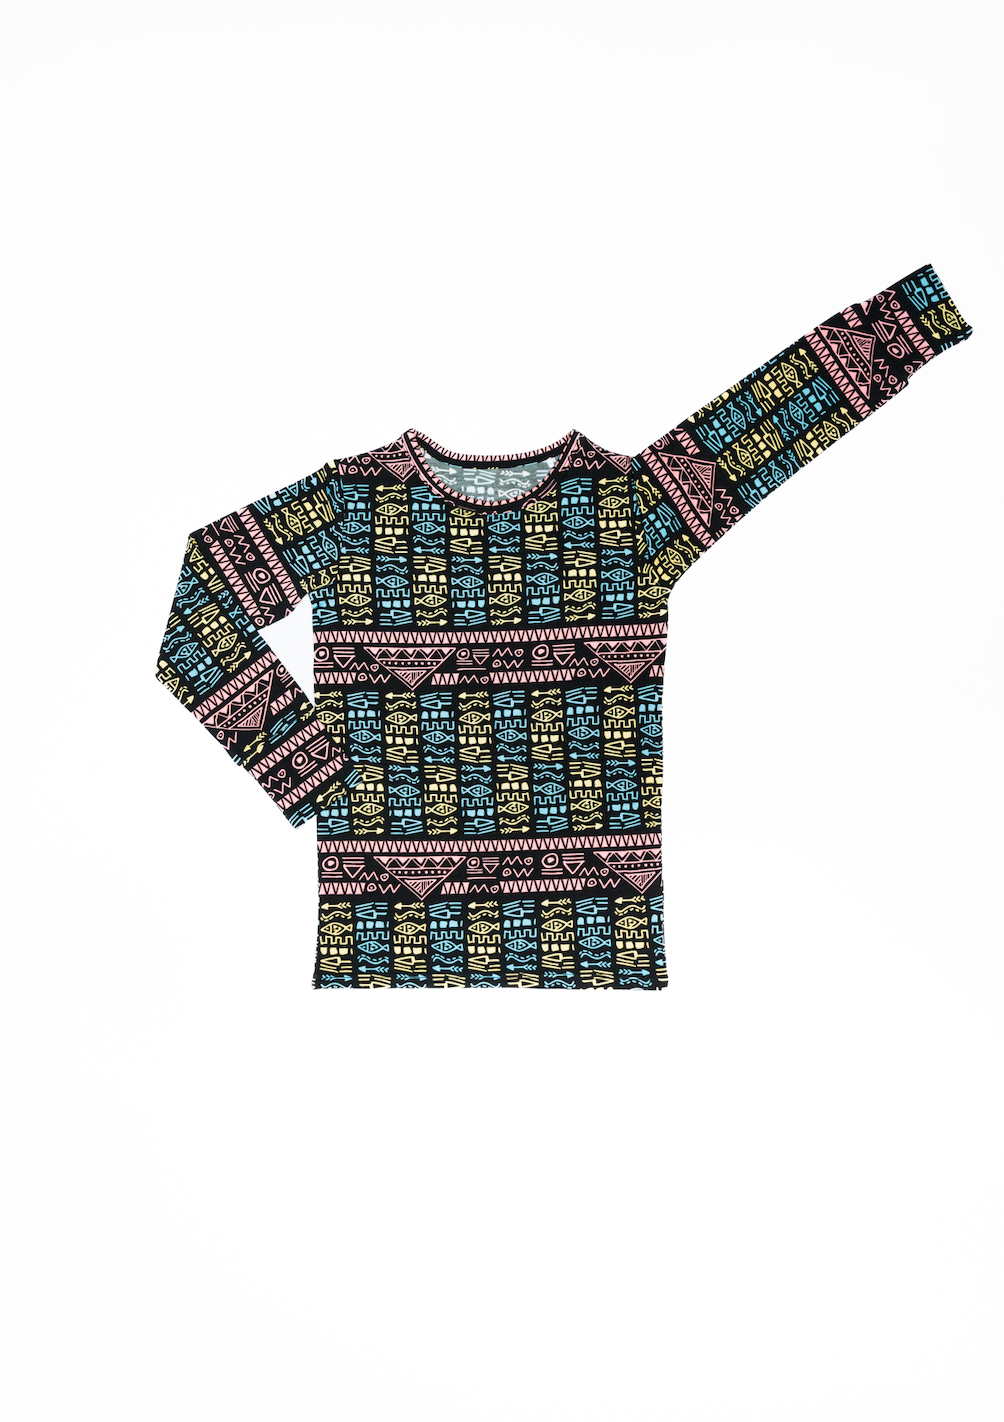 N'abali Kids Black Turtle First Edition 2 piece